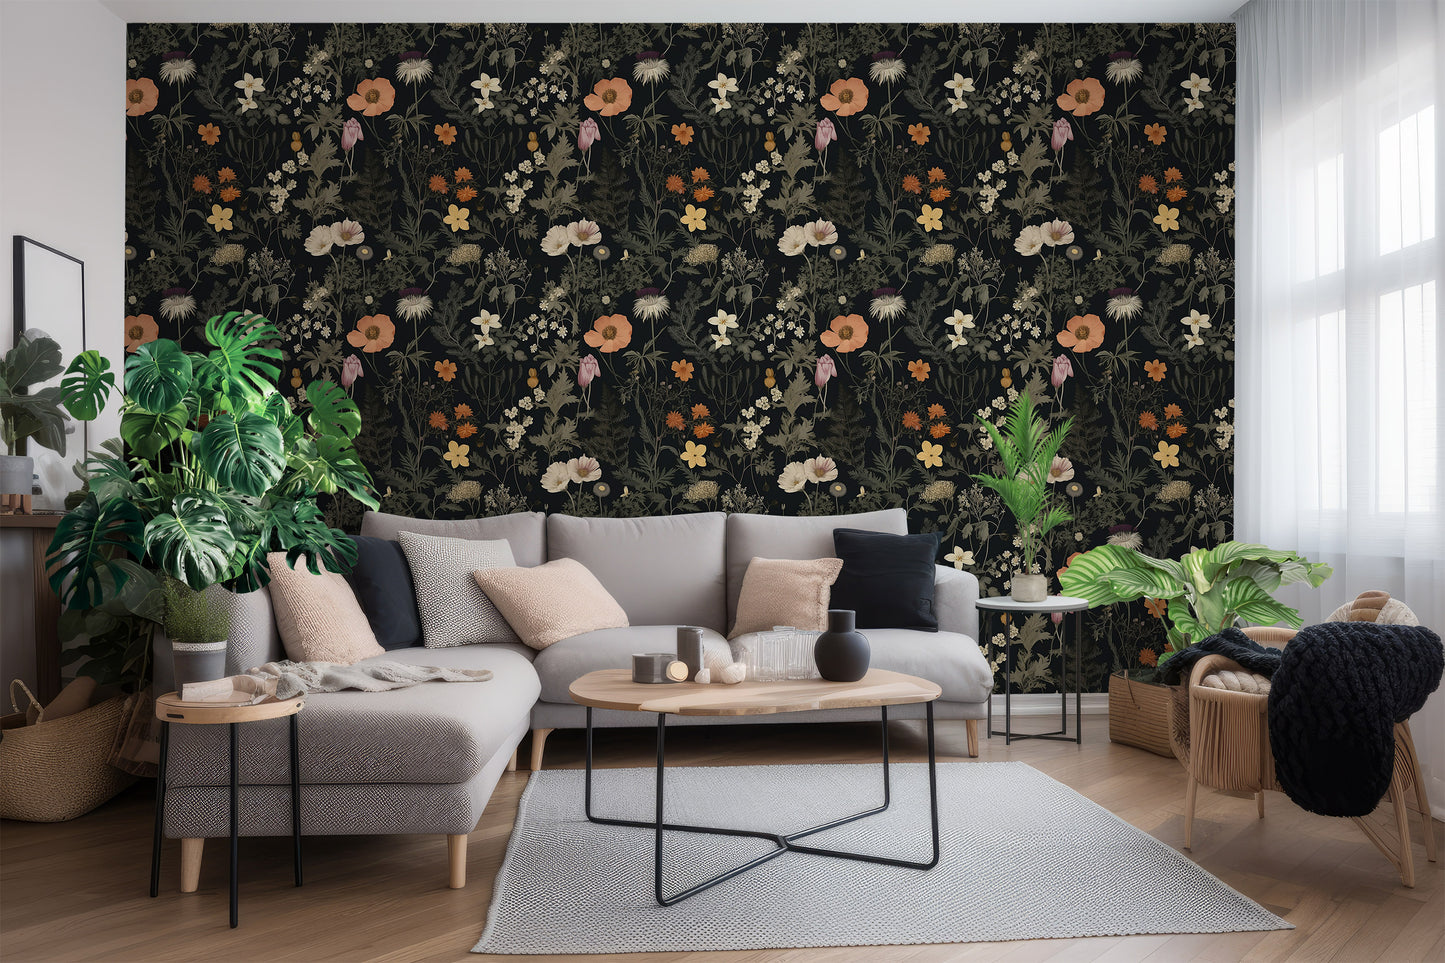 Dark Floral Peel and Stick Wall Decor - Wildflower Charm